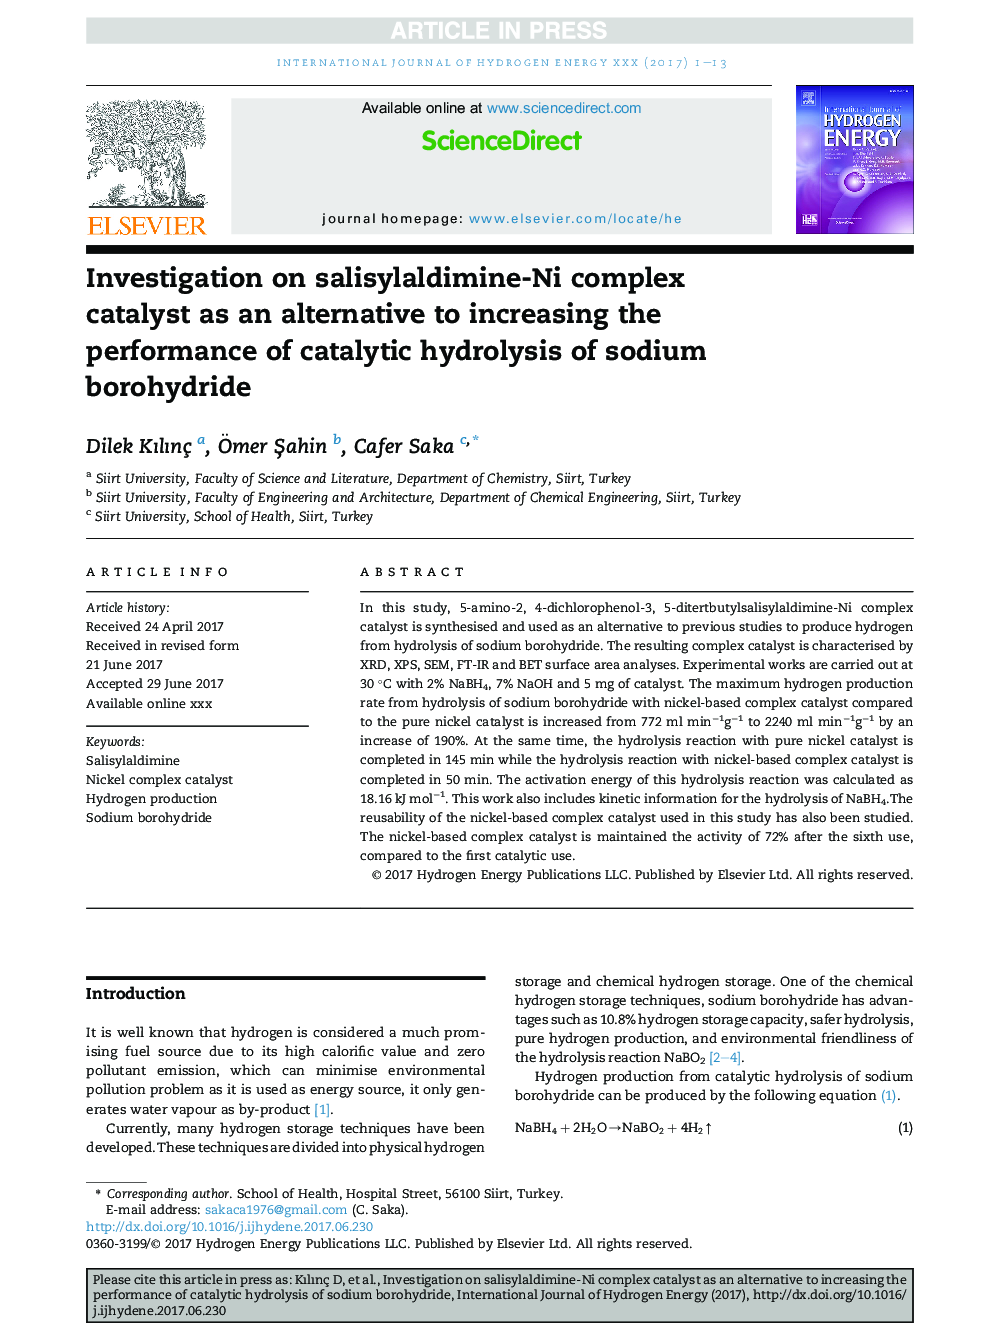 Investigation on salisylaldimine-Ni complex catalyst as an alternative to increasing the performance of catalytic hydrolysis of sodium borohydride